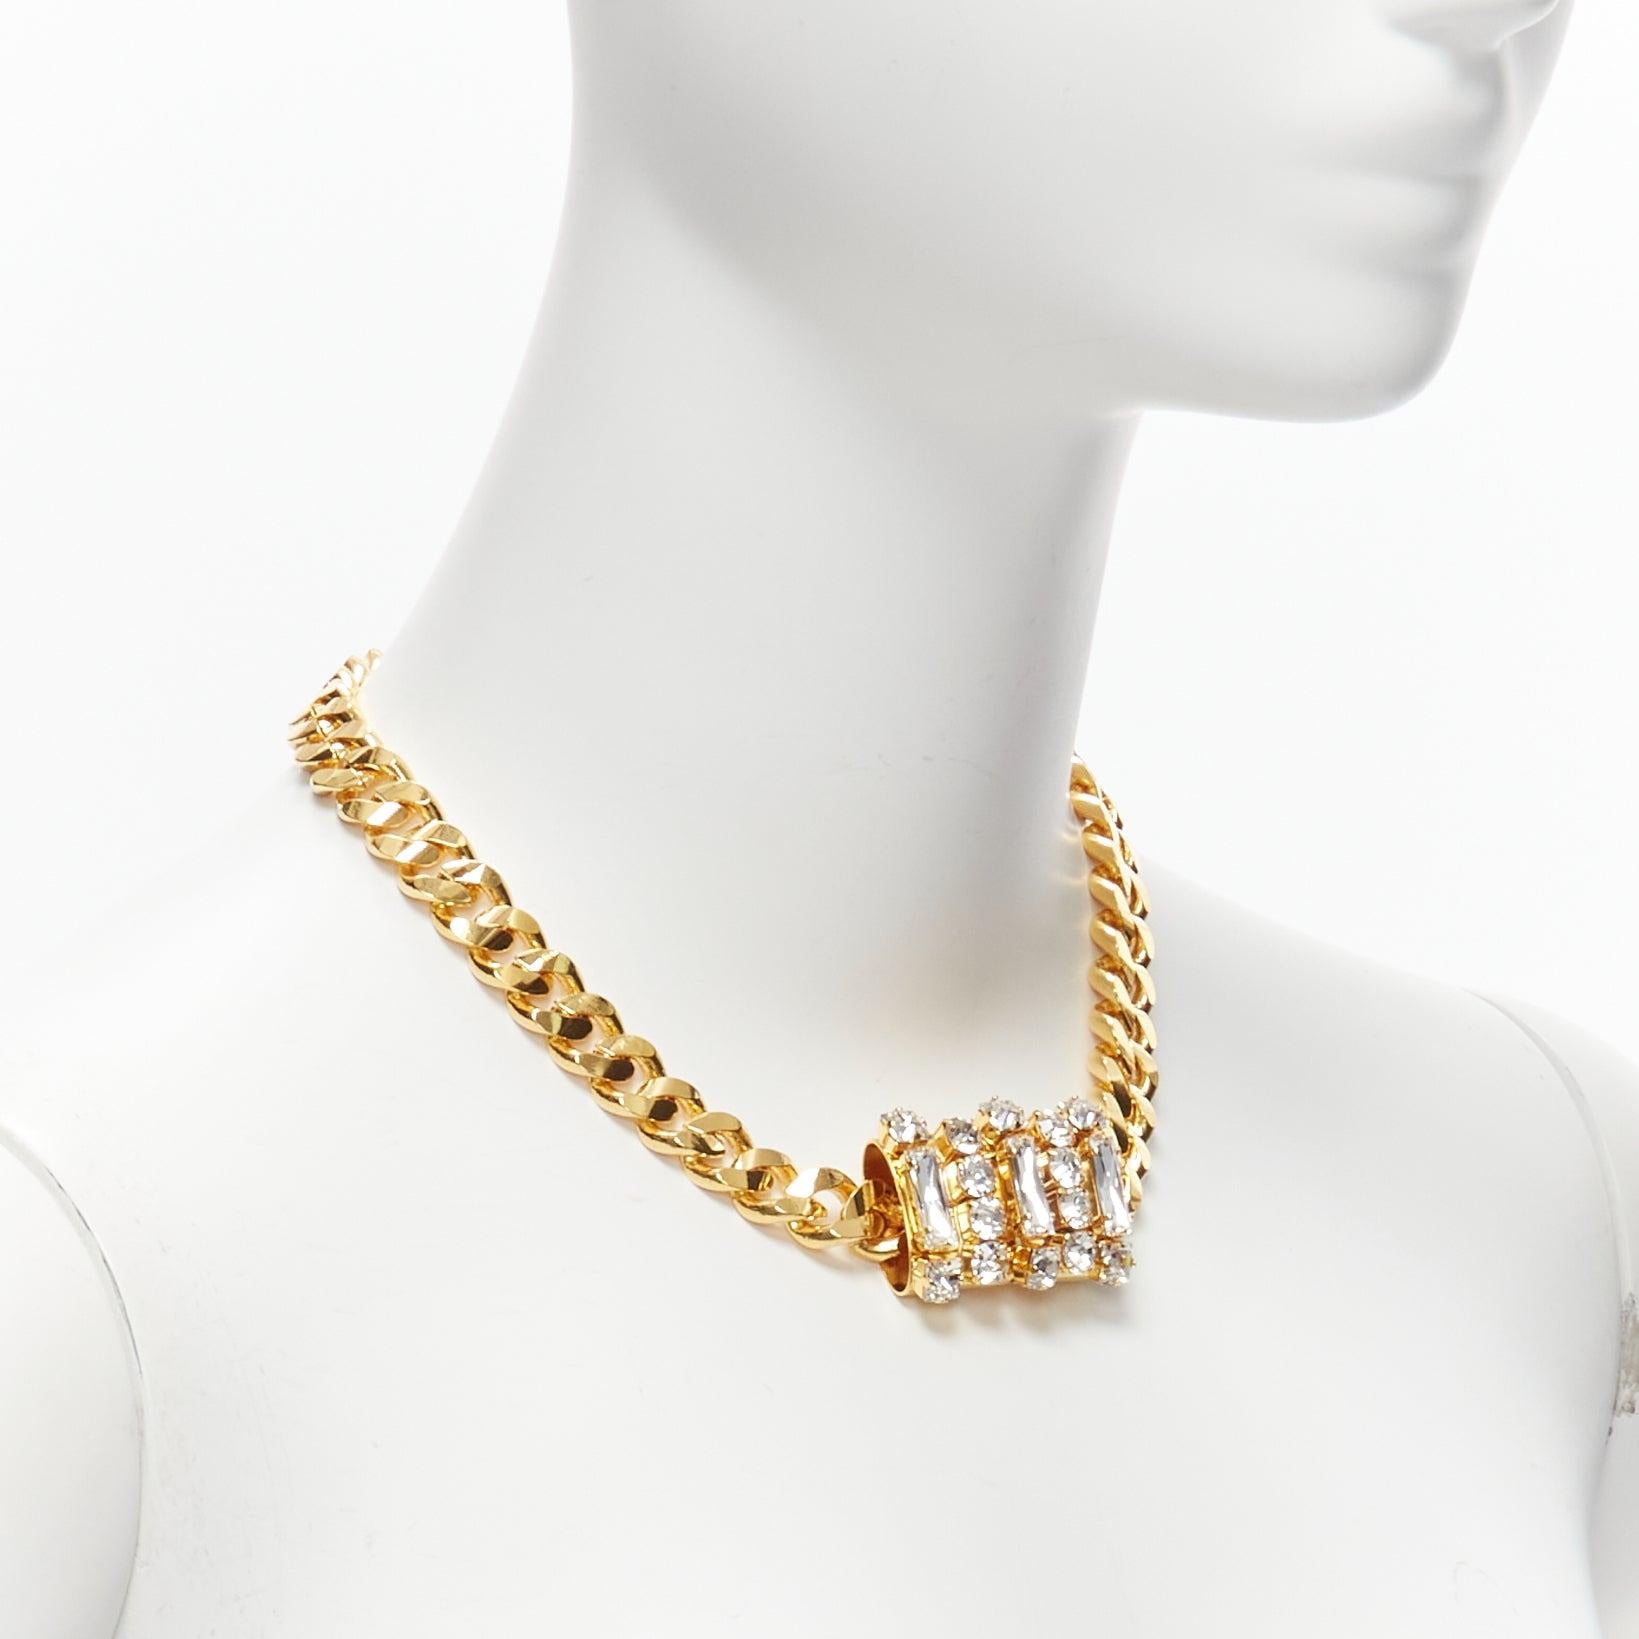 TOGA ARCHIVES clear crystal jewel gold metal bar chain necklace
Reference: BSHW/A00083
Brand: Toga Archives
Material: Metal
Color: Gold, Clear
Pattern: Solid
Closure: Push Clasp
Lining: Gold Metal

CONDITION:
Condition: Excellent, this item was